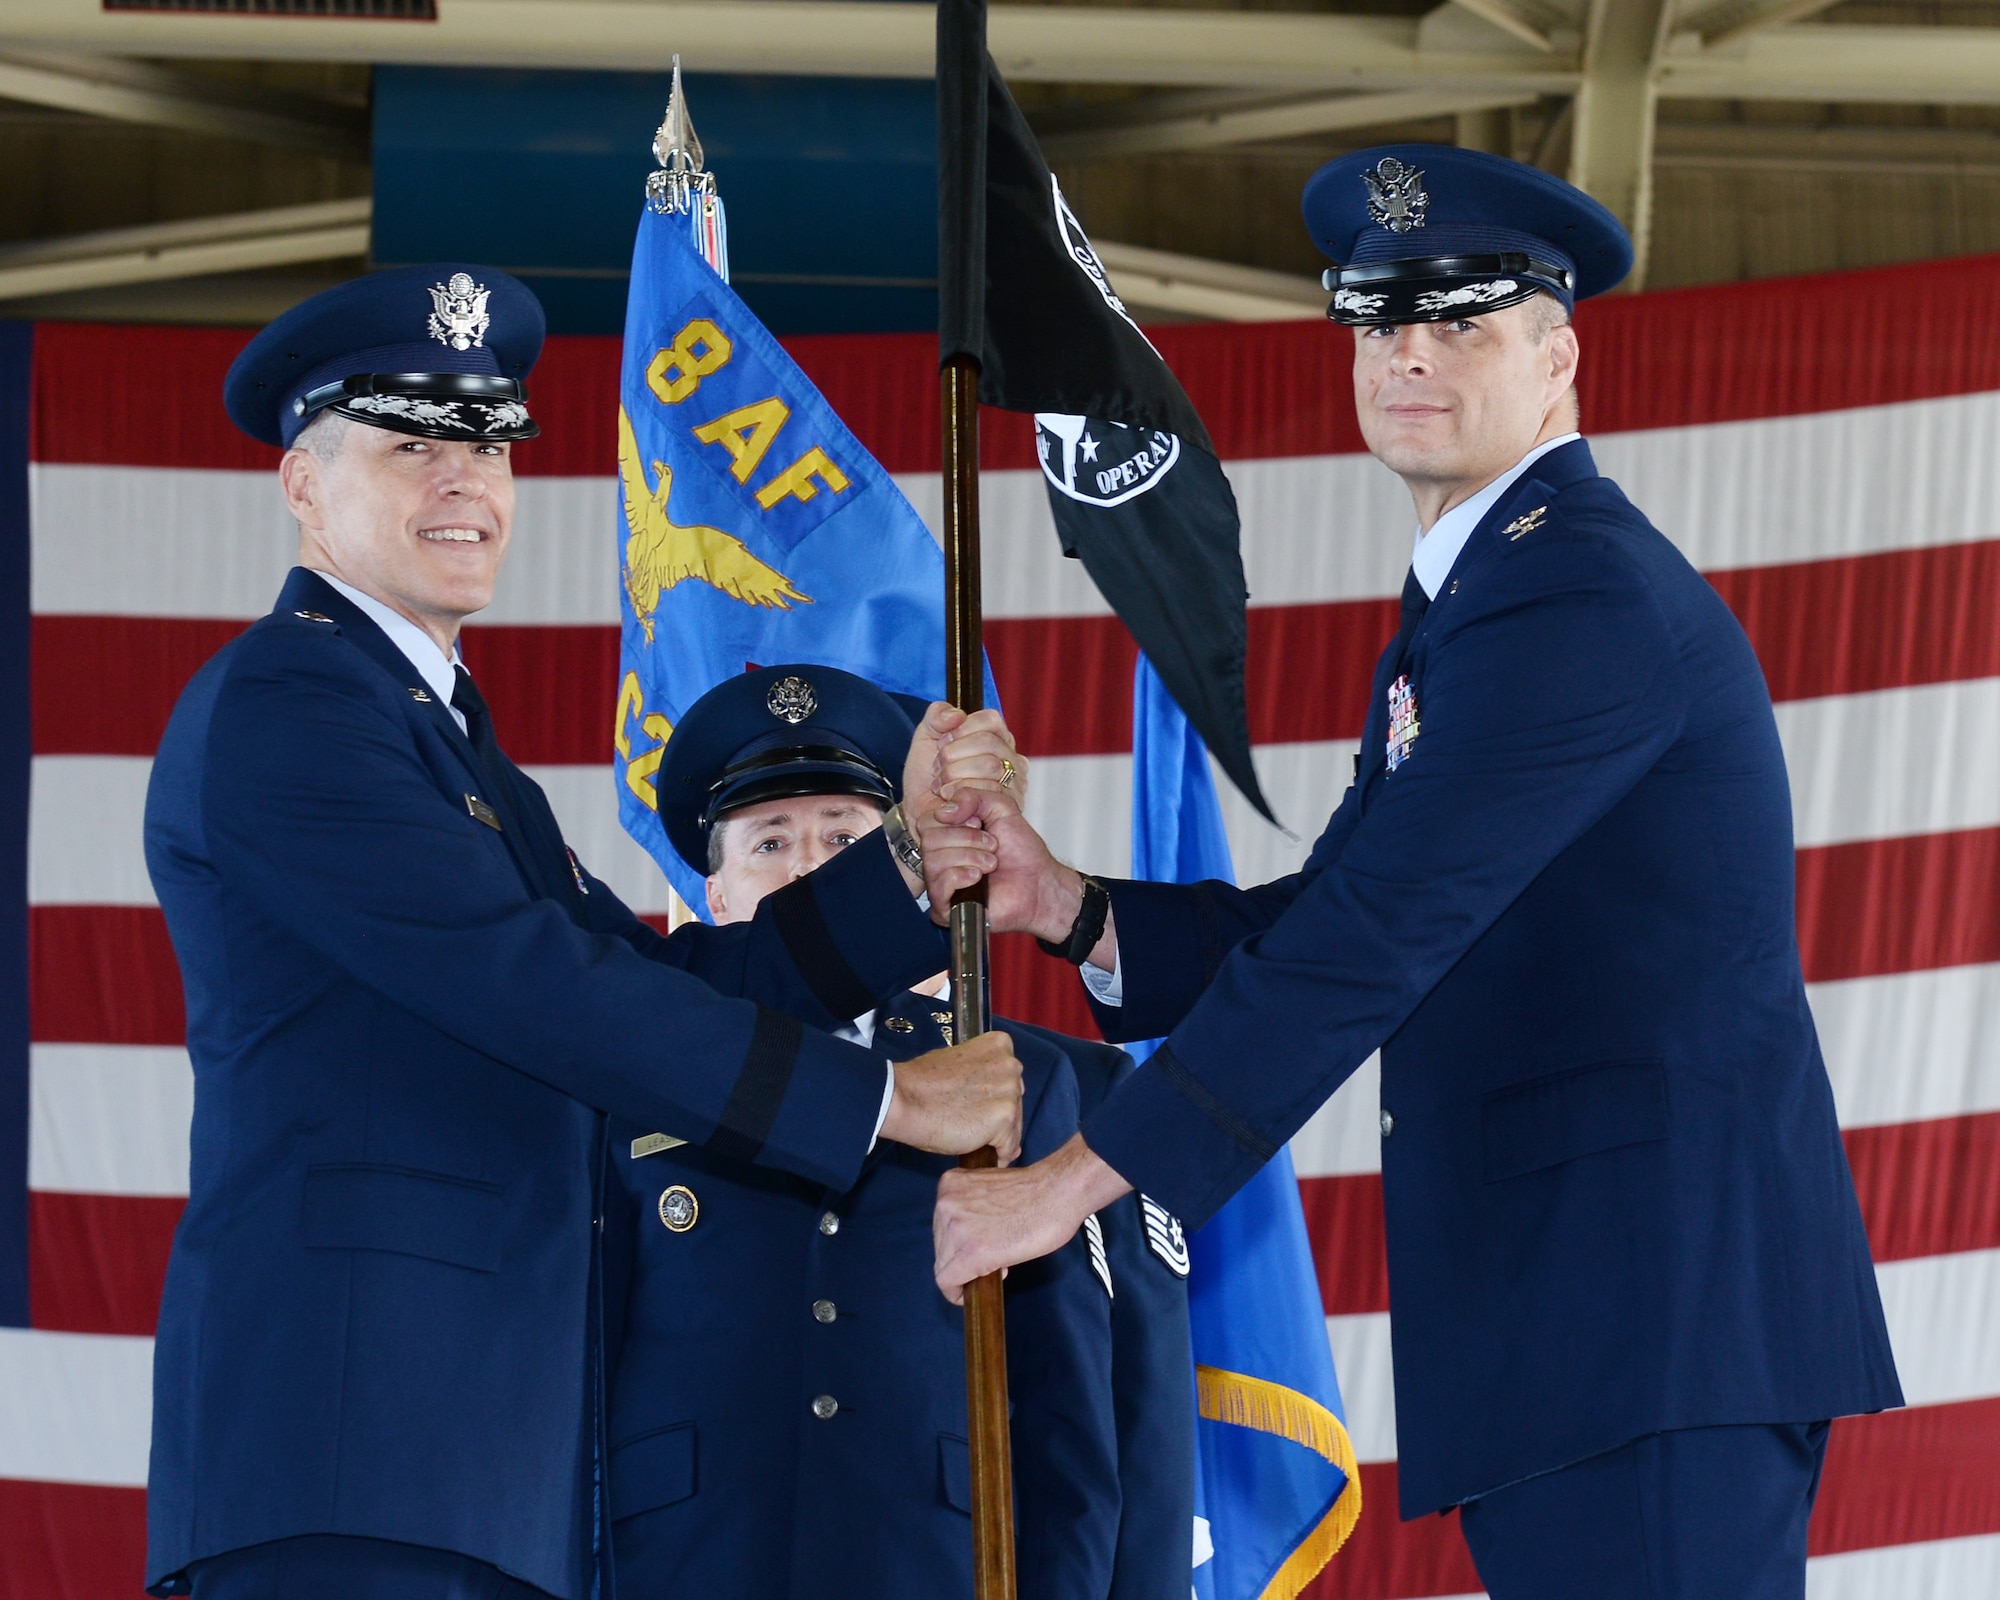 U.S. Air Force Maj. Gen. Thomas Bussiere, Eighth Air Force and Joint-Global Strike Operations Center commander (left)  presents the National Airborne Operations Center guidon to U.S. Air Force Jeremiah Baldwin, incoming 595th C2G commander and NAOC commander (right), during the dual-595th Command and Control Group and National Airborne Operations Center change of command ceremony July 27, 2018, at Offutt Air Force Base, Nebraska as a single commander assumed responsibility for both organizations. Passing of the guidon is a time-honored military tradition signifying the transfer of command to an incoming commander. (U.S. Air Force photo by Charles Haymond)